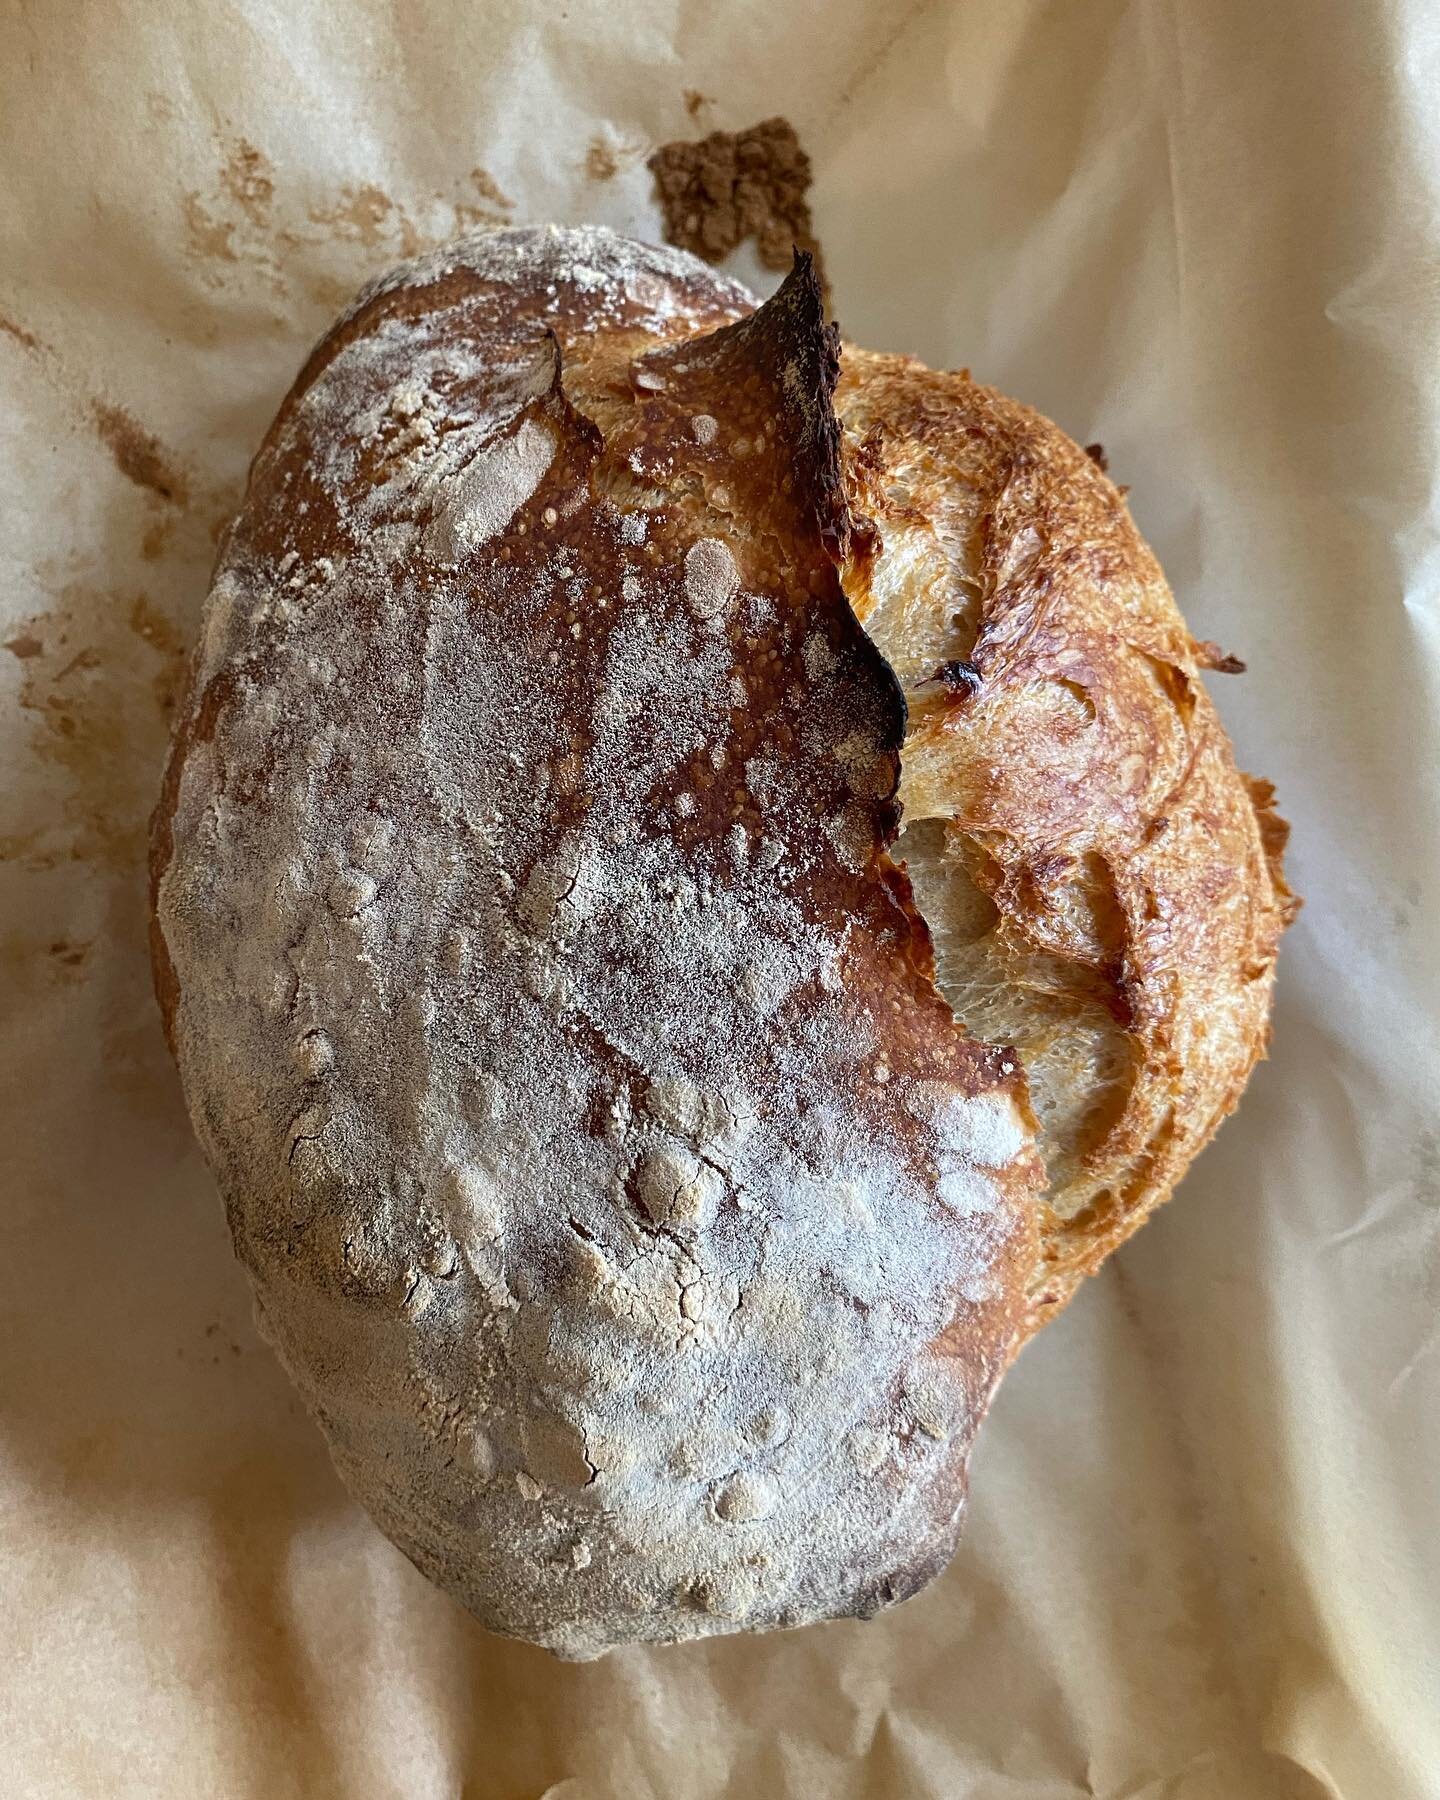 long time no post&hellip; we are back!! ☀️
this picture was taken this morning in gwen&lsquo;s flatshare kitchen. she started the day with some pre-lecture baking. 

love from london 
#slowmorning #sourdough #london